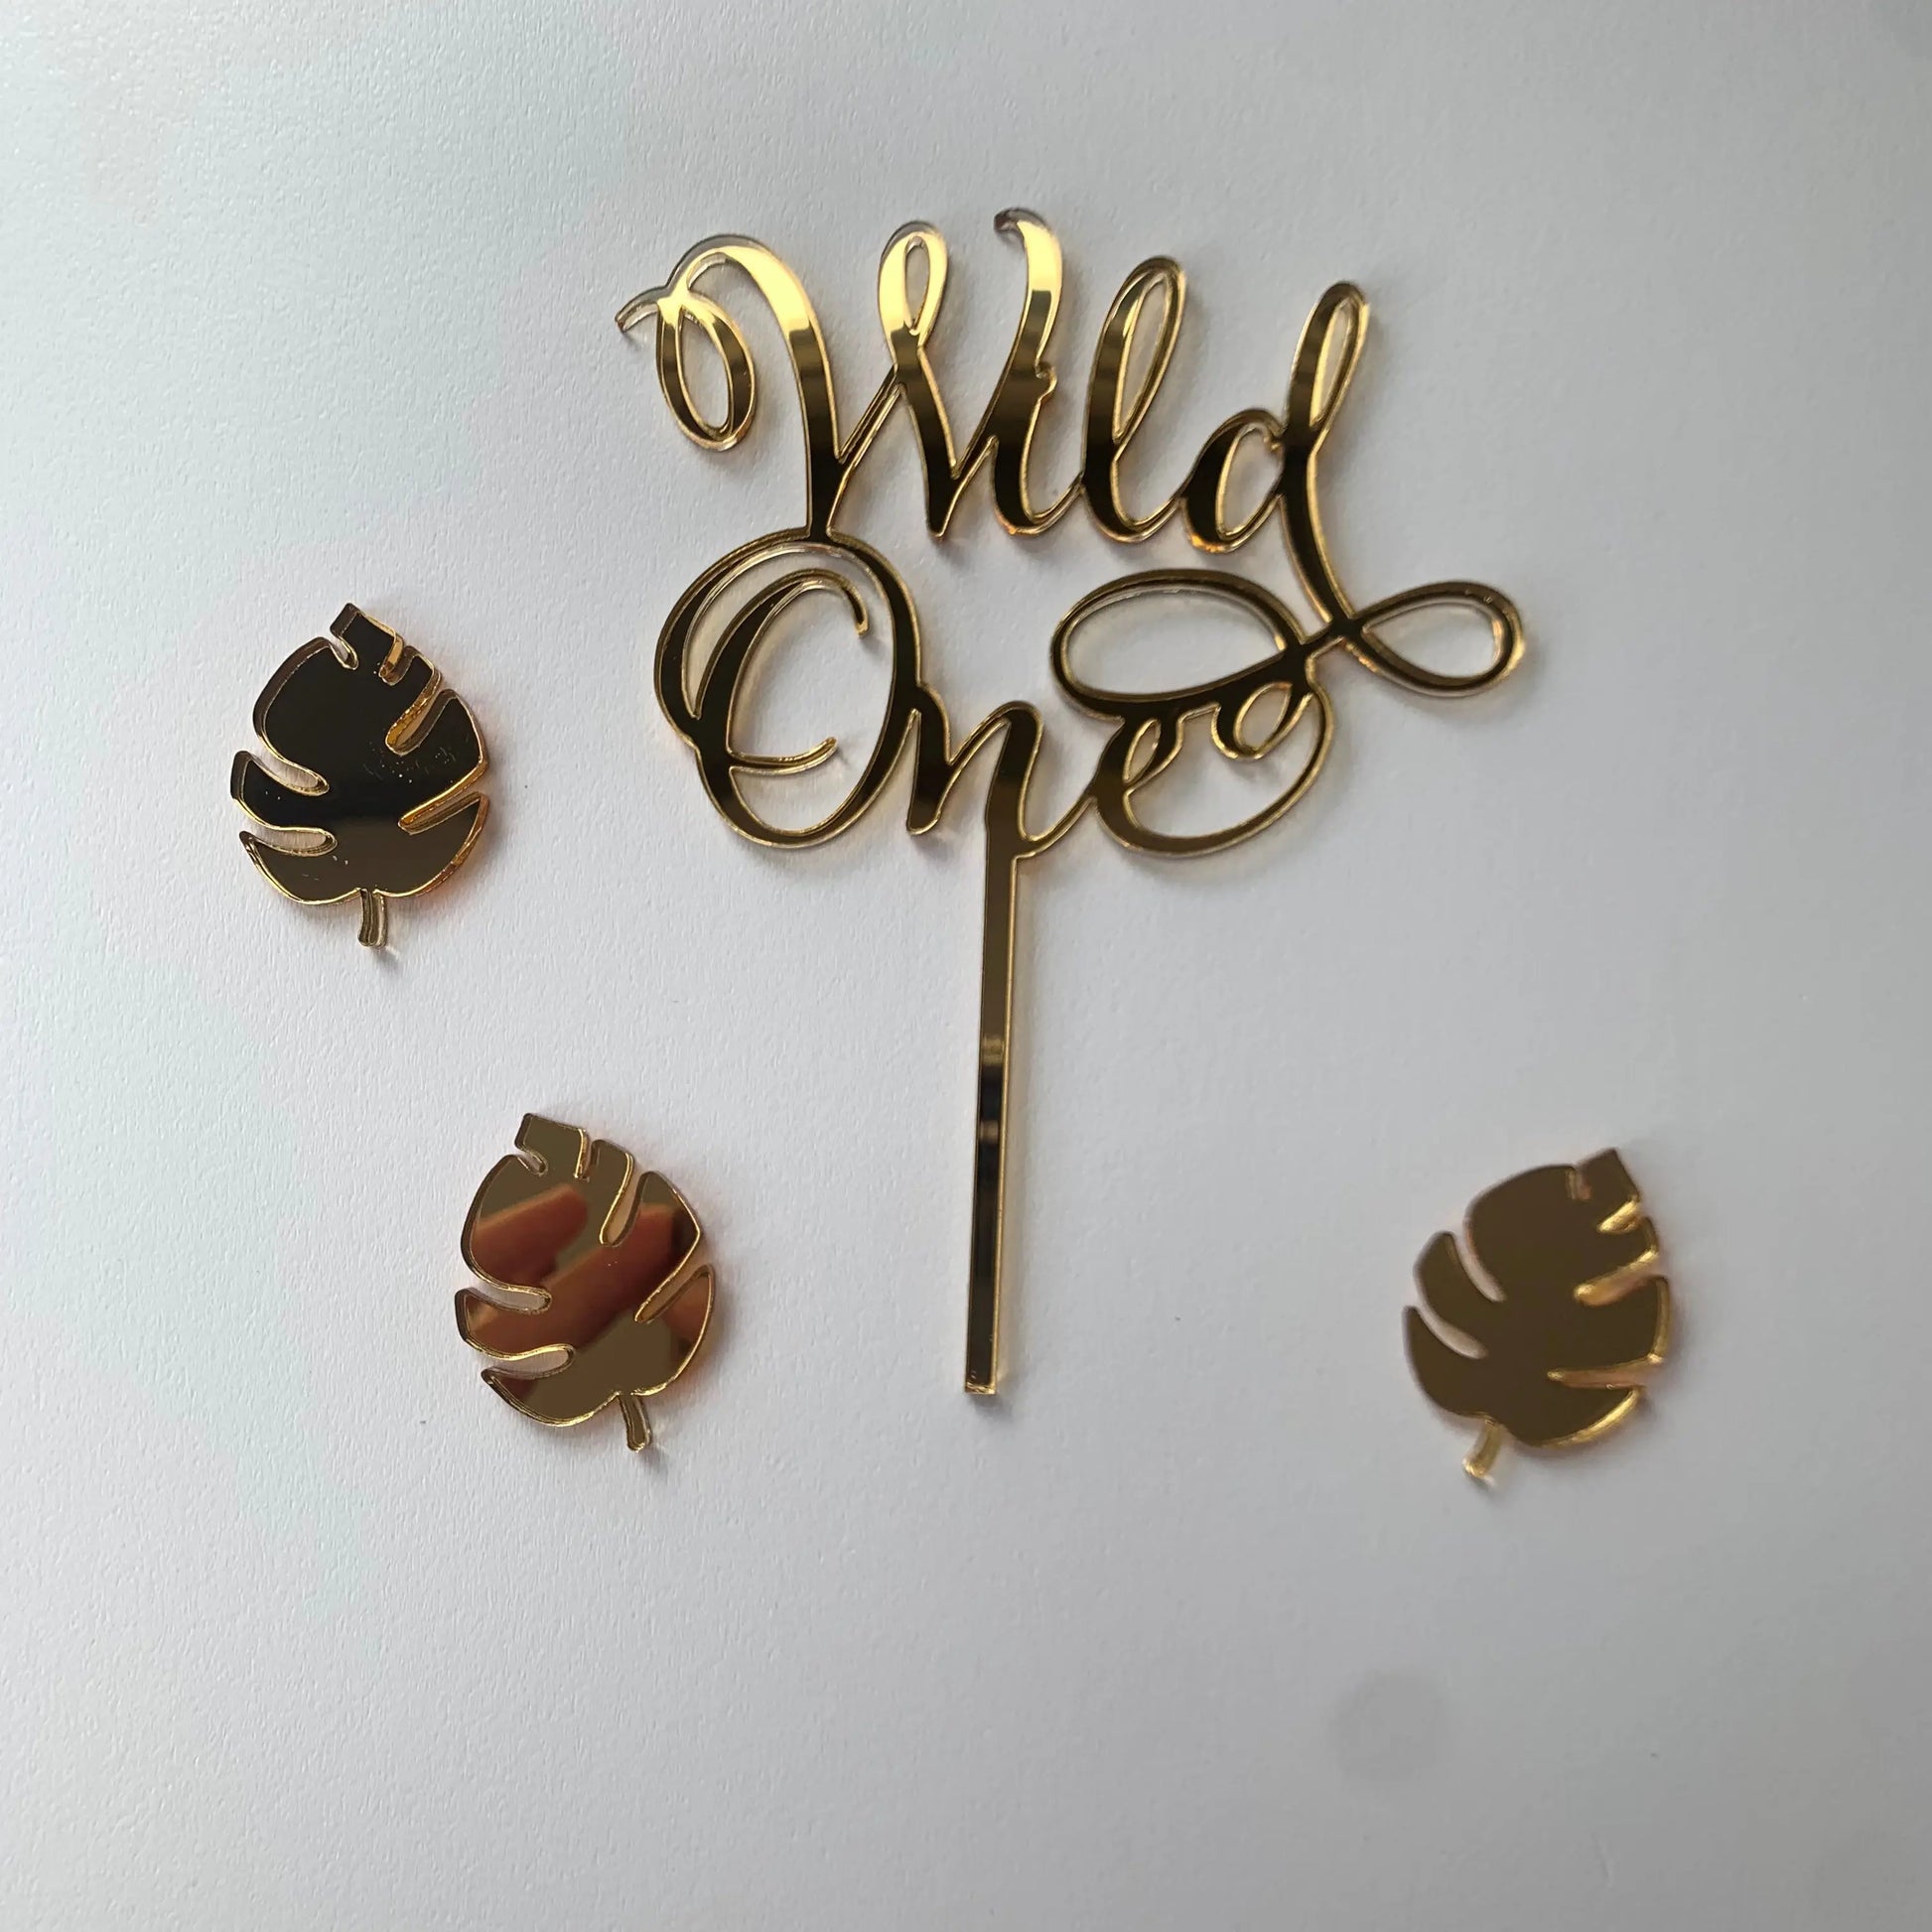 Wild one cake topper and 3 leaves MEG cookie cutters